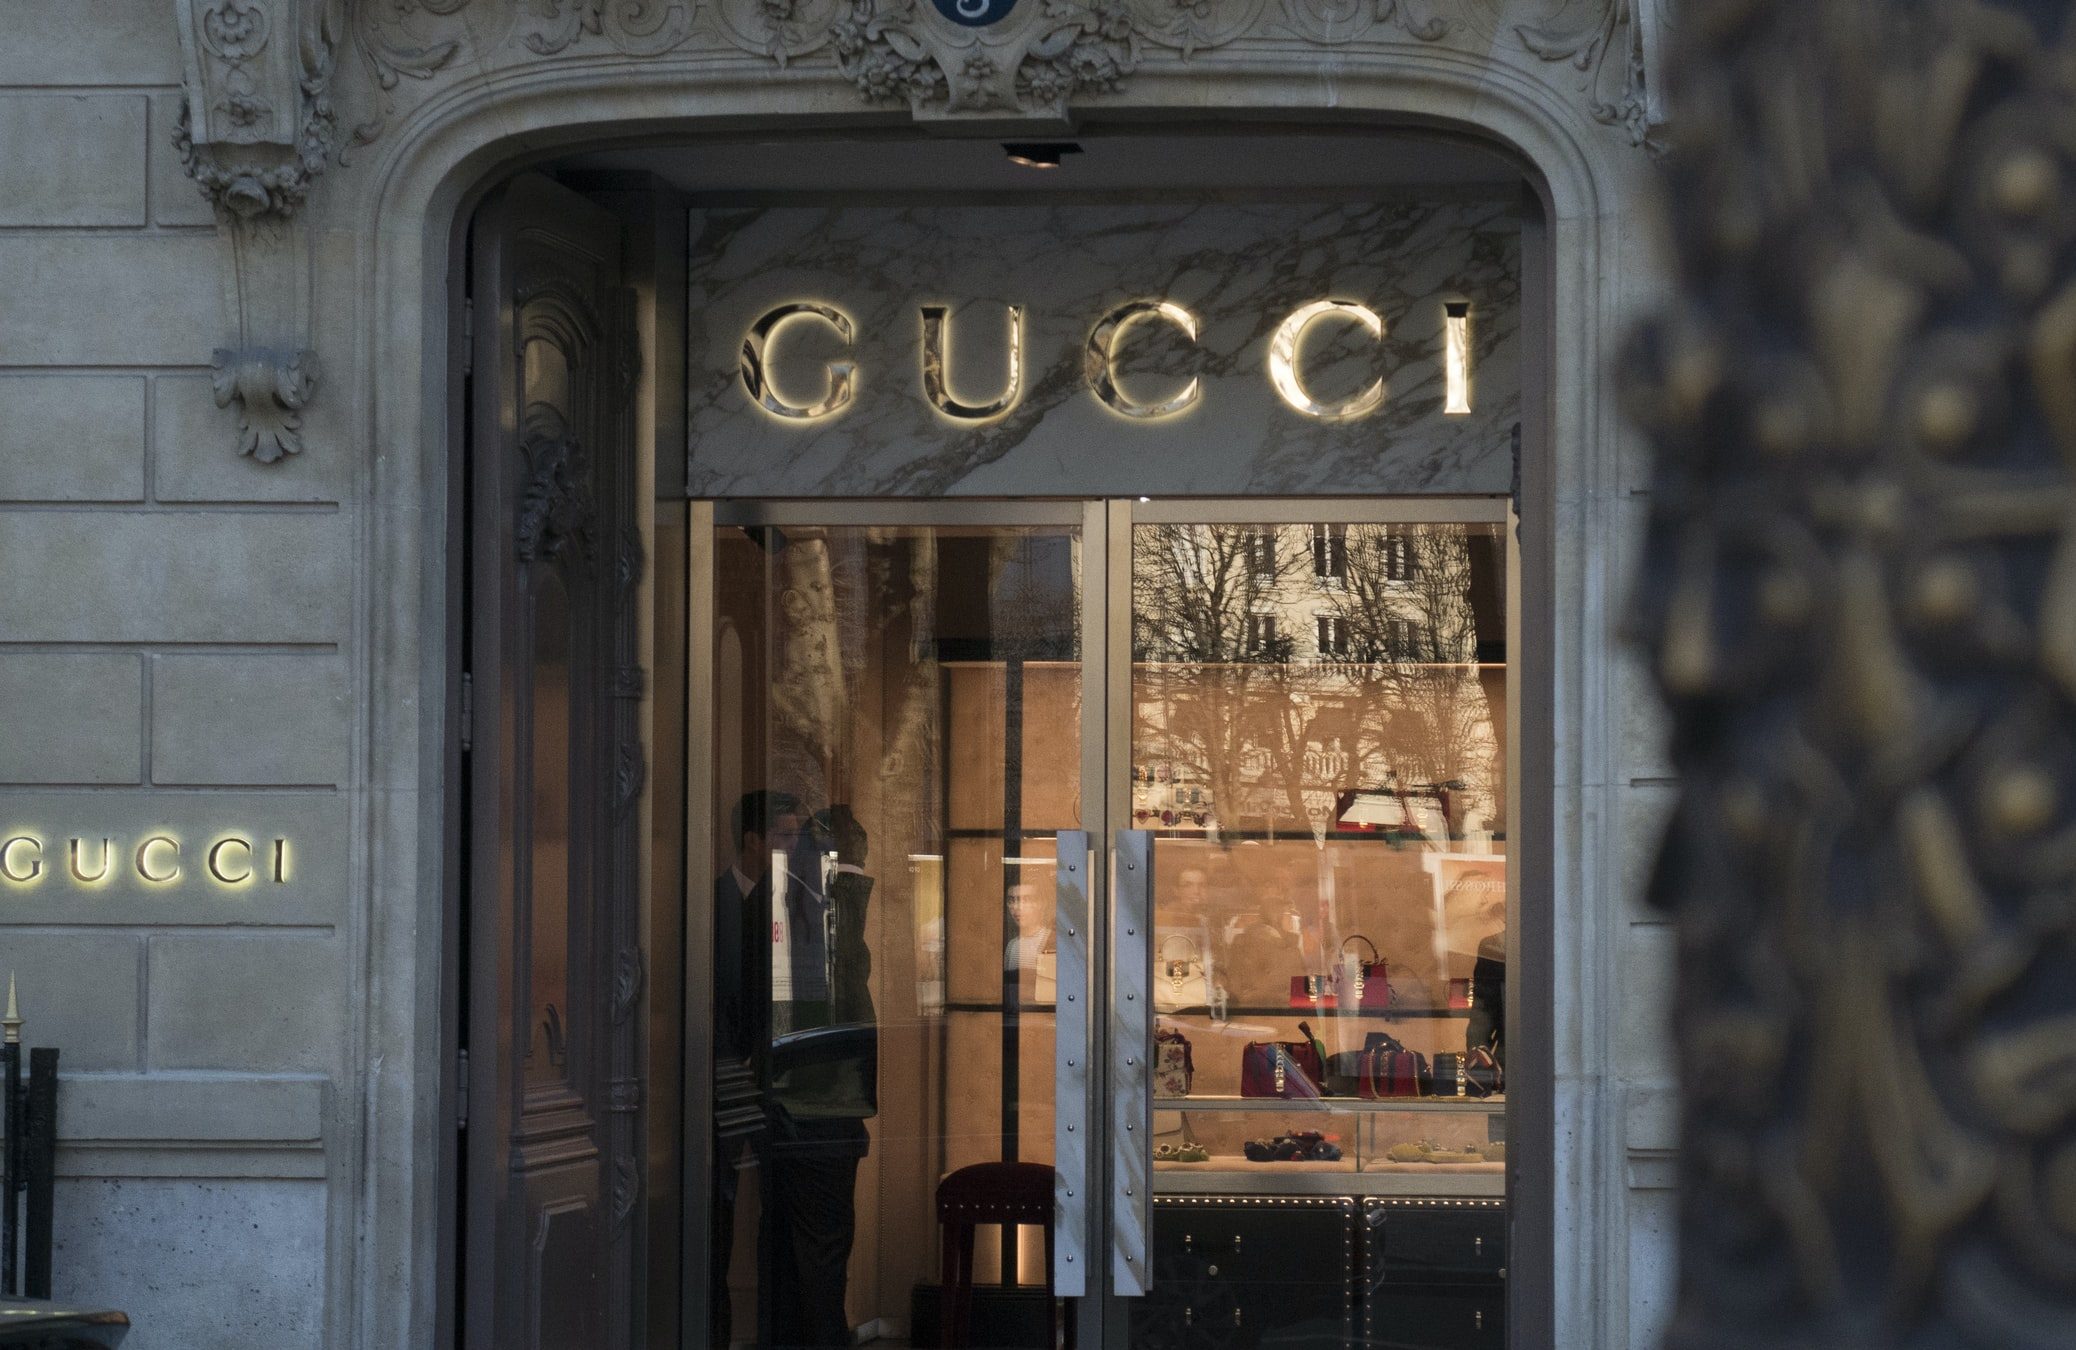 Gucci's marketing strategy through the years - The Strategy Story